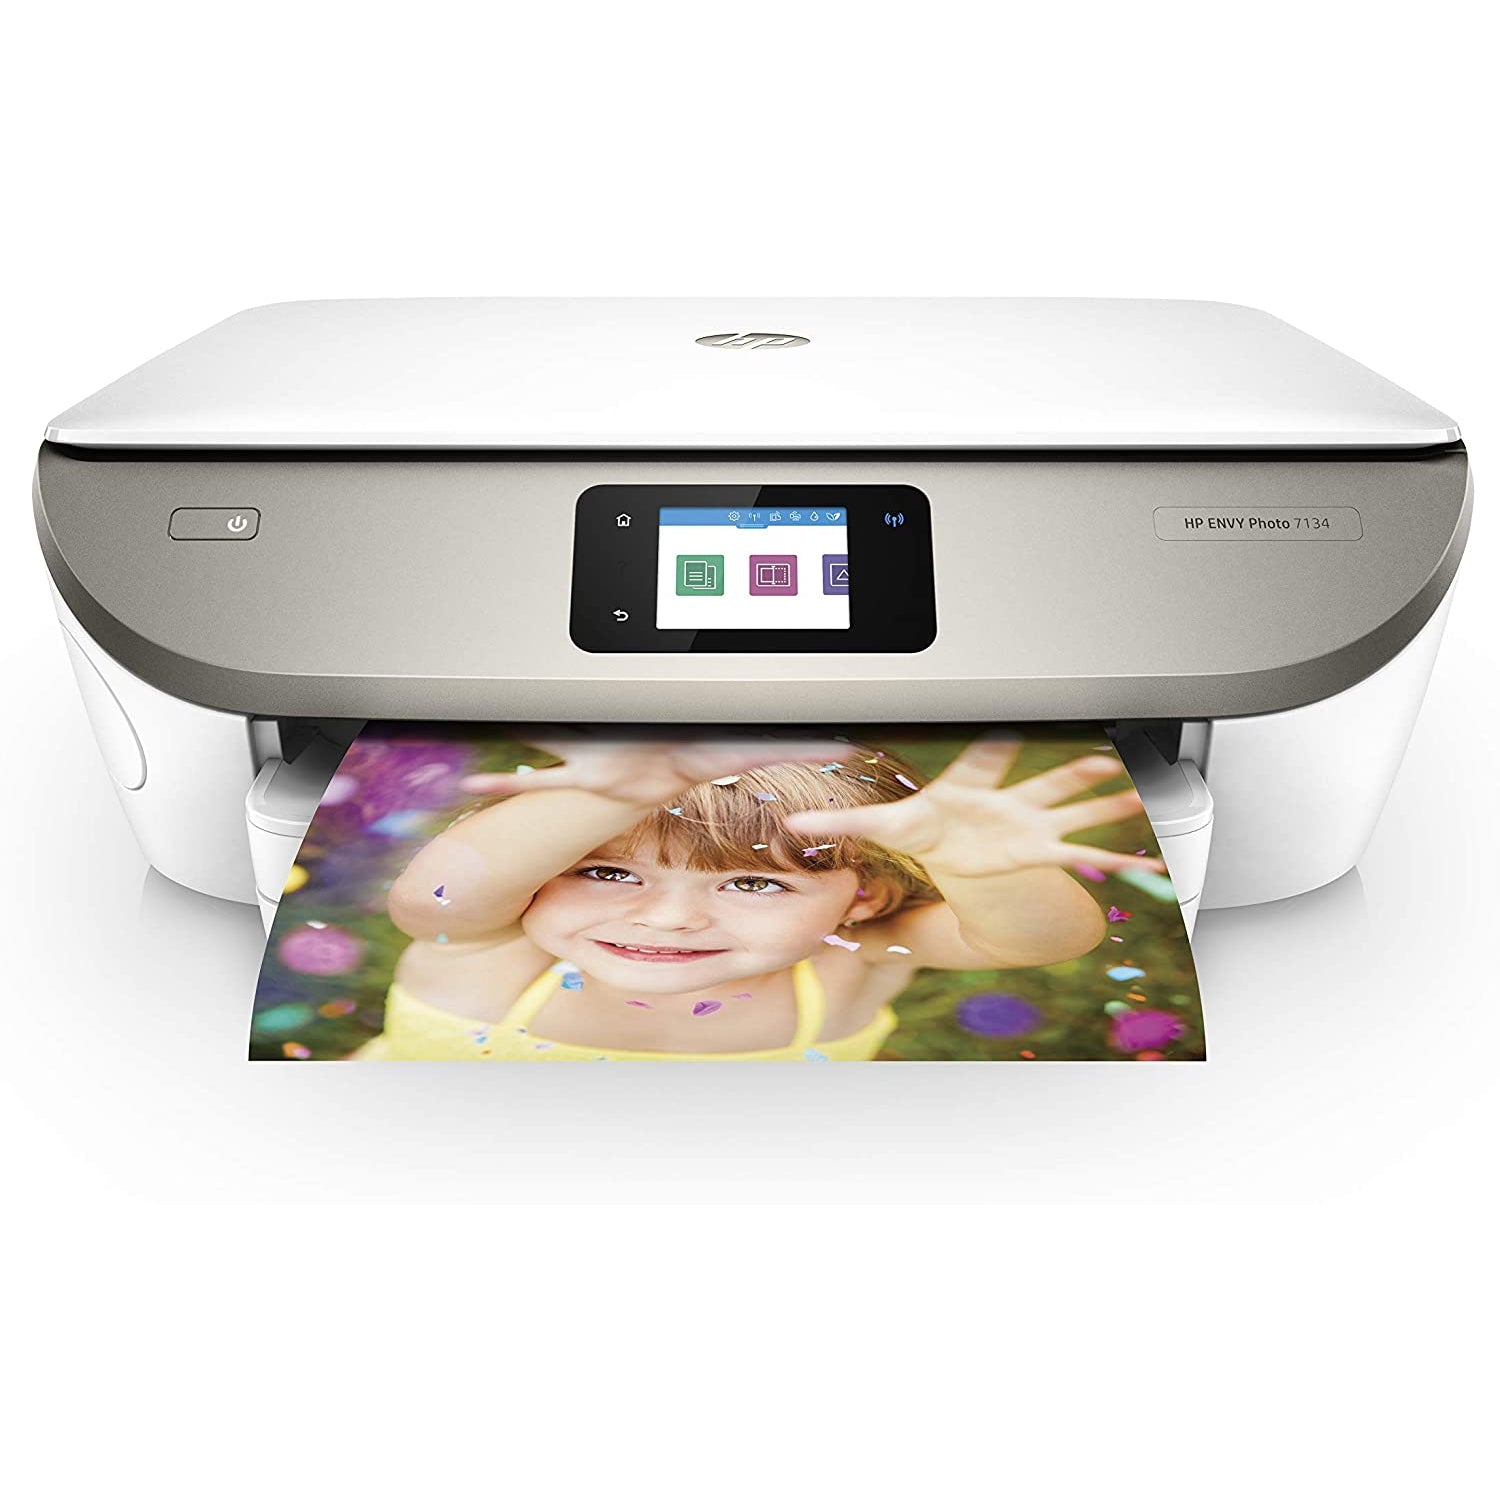 HP Envy Photo 7134 All-in-One Wireless Printer, White